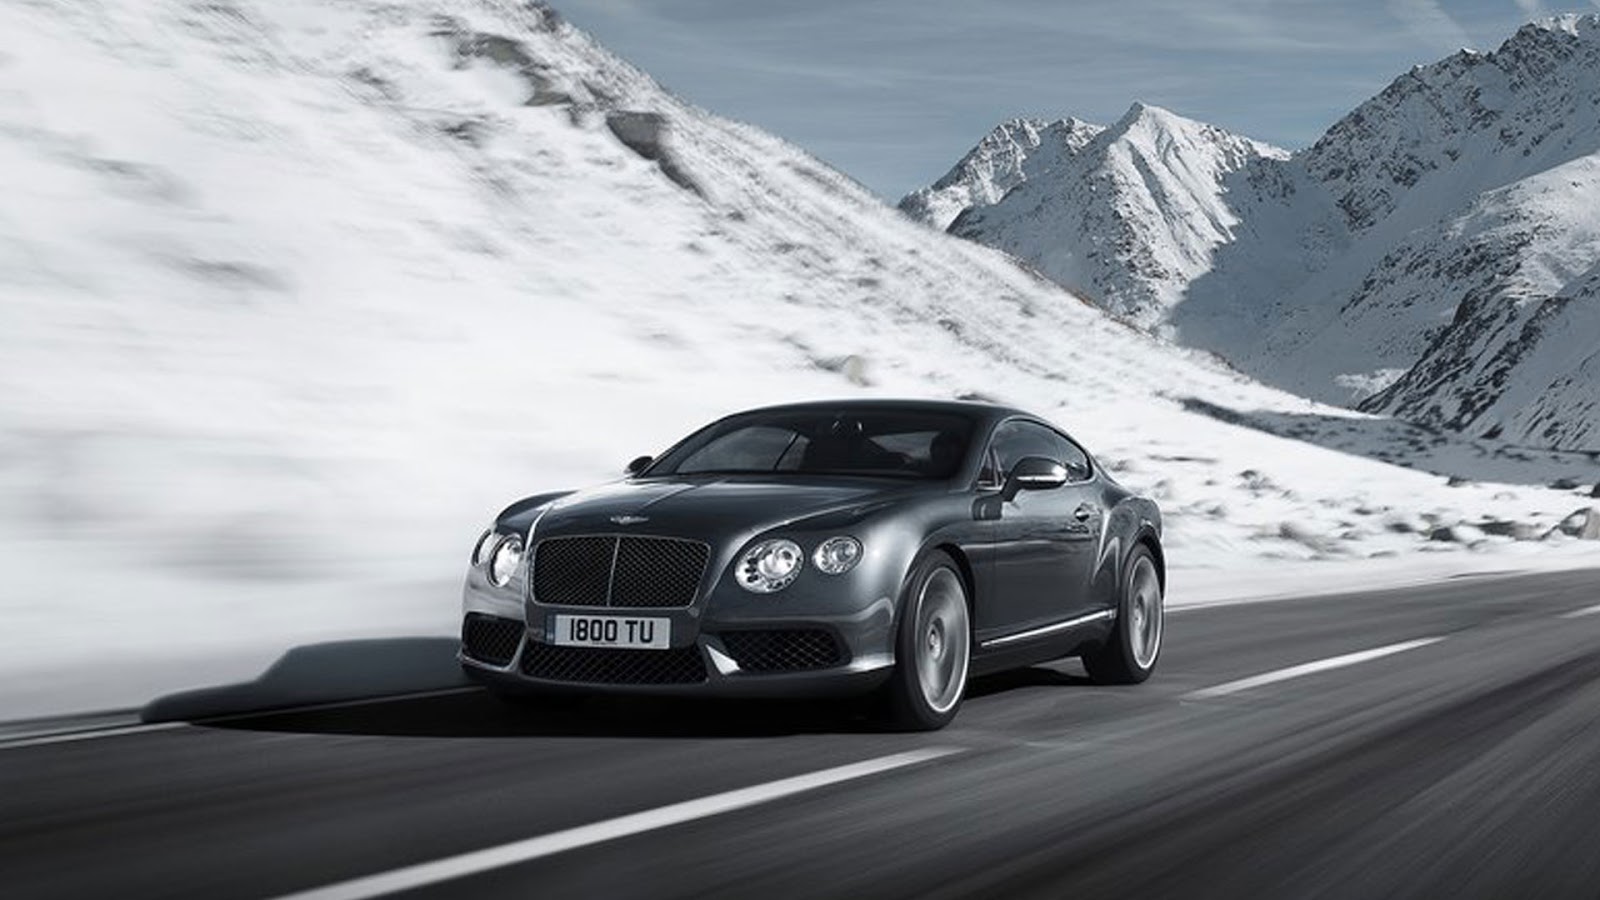 Bentley Car Wallpaper HD Background Collection